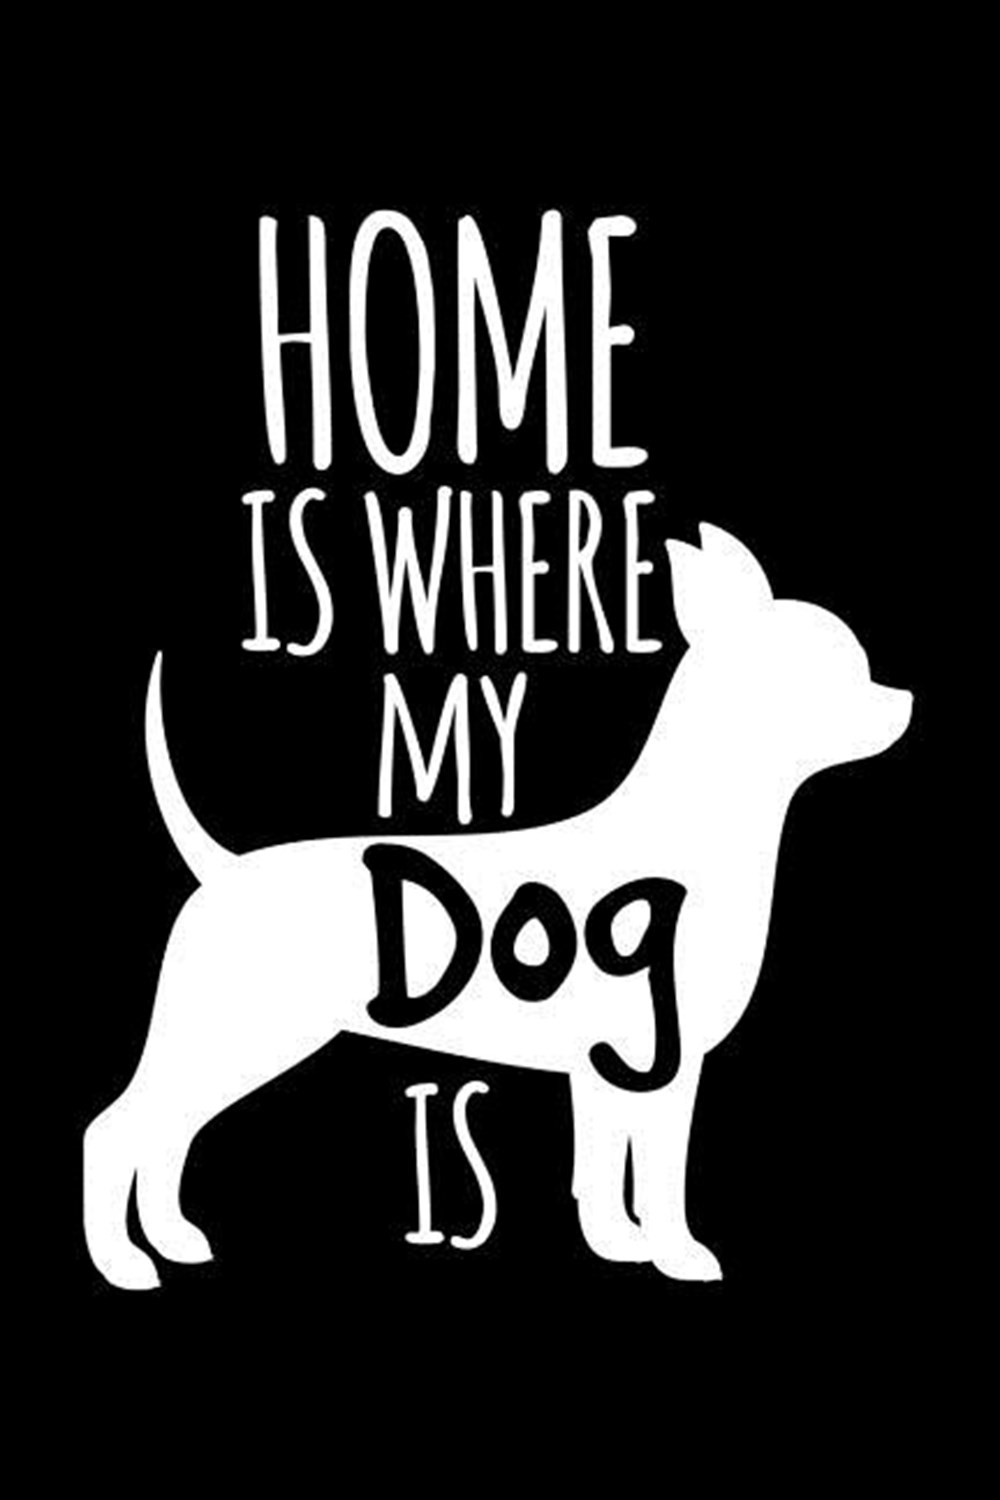 Home Is Where My Dog Is Blank Paper Sketch Book - Artist Sketch Pad Journal for Sketching, Doodling,